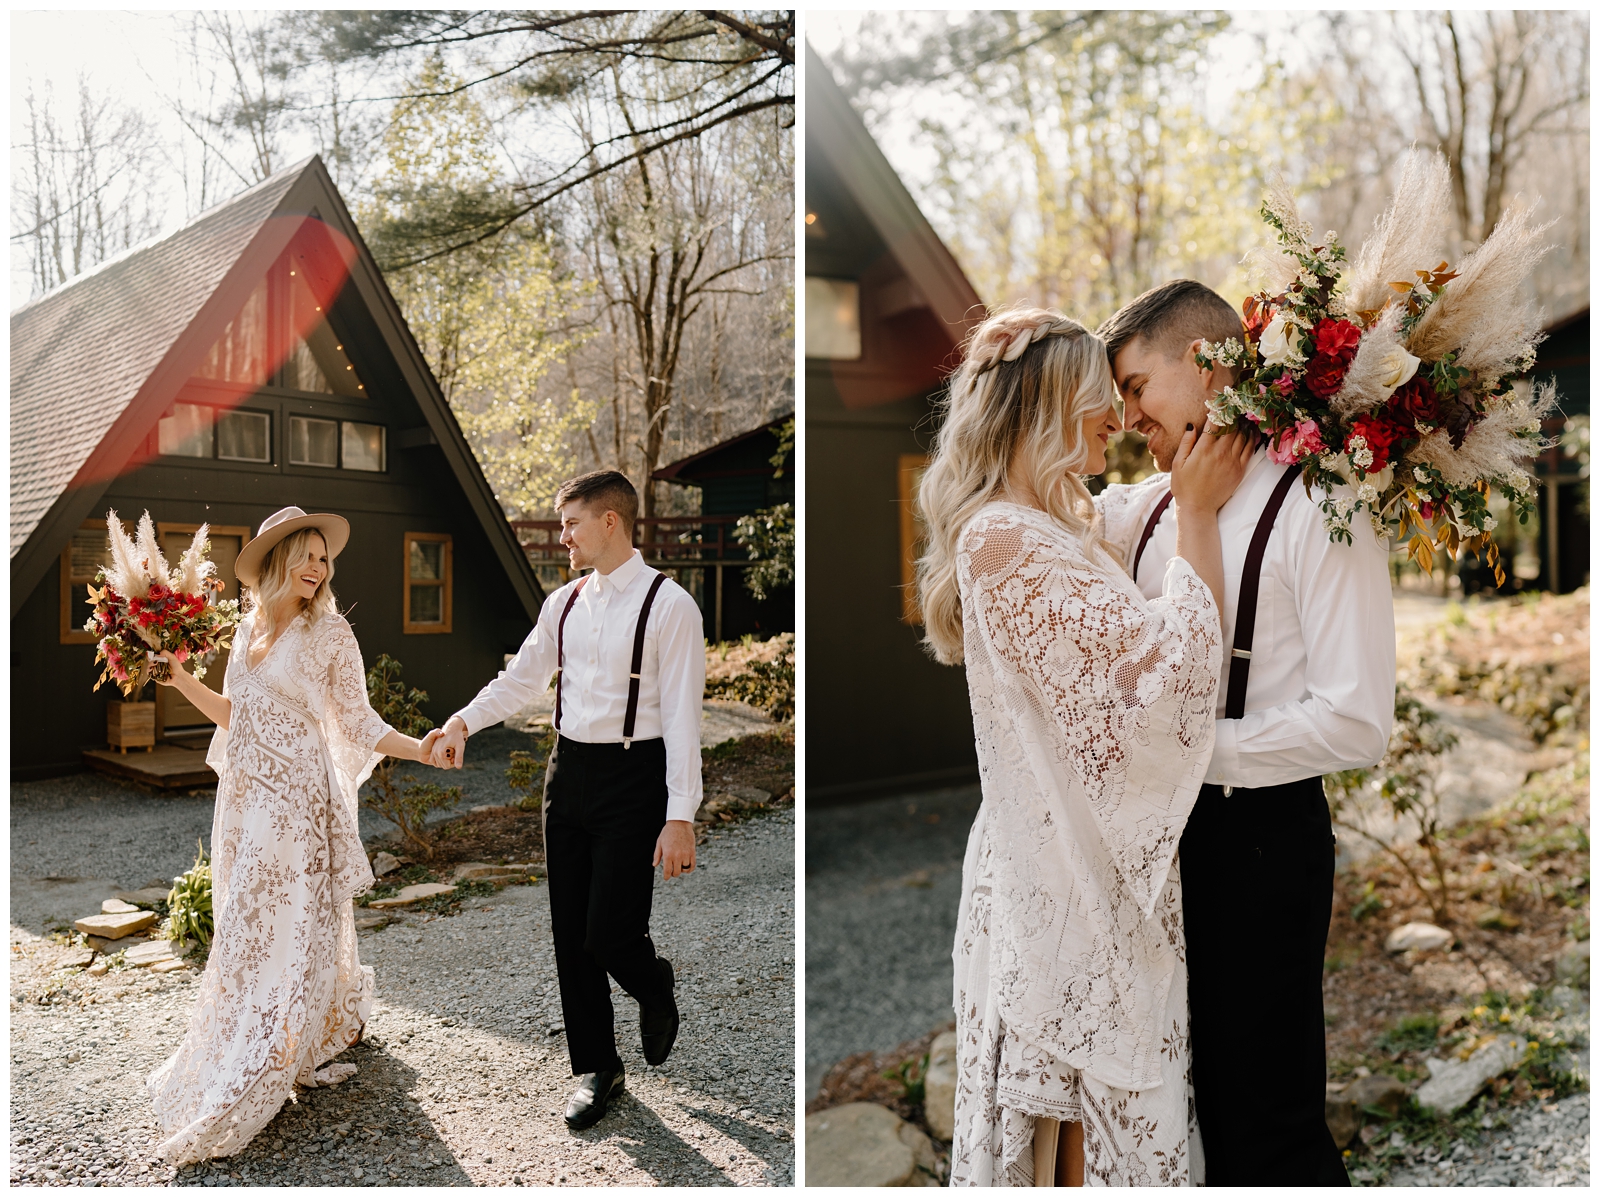 Have a romantic and intimate elopement in Boone, NC